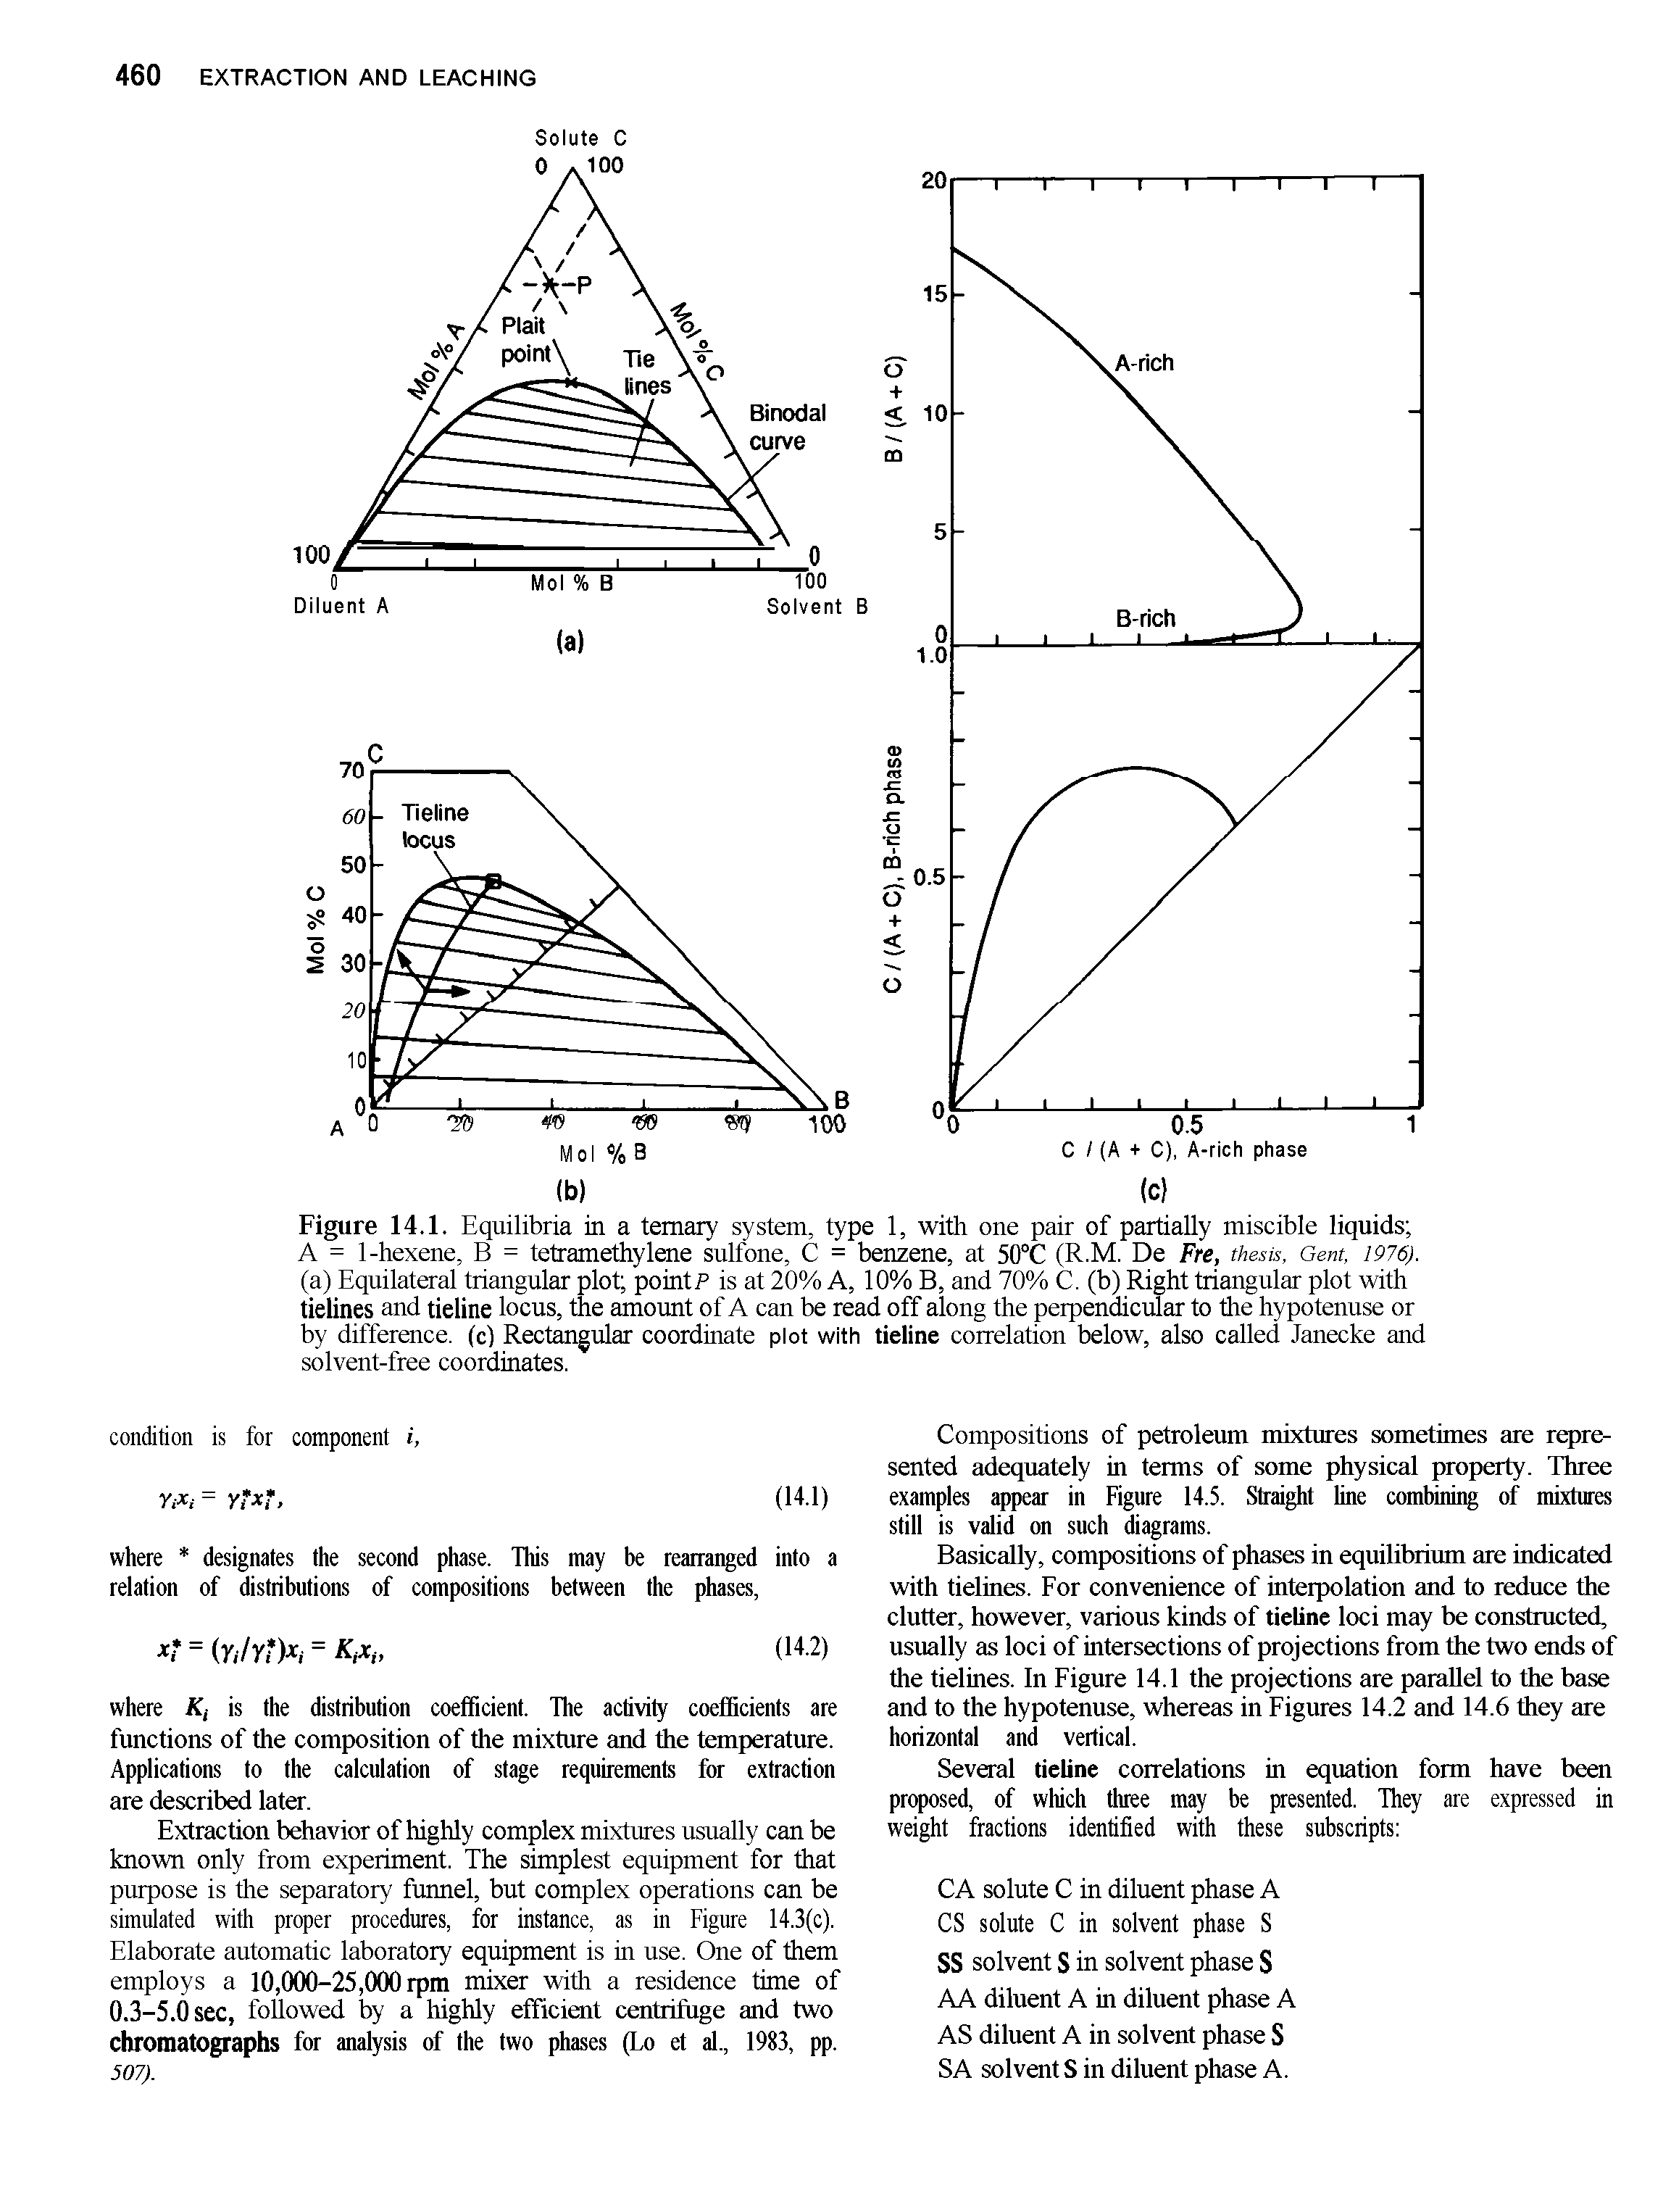 Figure 14.1. Equilibria in a ternary system, type 1, with one pair of partially miscible liquids A = 1-hexene, B = tetramethylene sulfone, C = benzene, at 50°C (R.M. De Fre, thesis, Gent, 1976). (a) Equilateral triangular plot pointP is at 20% A, 10% B, and 70% C. (b) Right triangular plot with tielines and tieline locus, Ihe amount of A can be read off along the perpenicular to the hypotenuse or by difference, (c) Rectangular coordinate plot with tieline correlation below, also called Janecke and solvent-free coordinates.